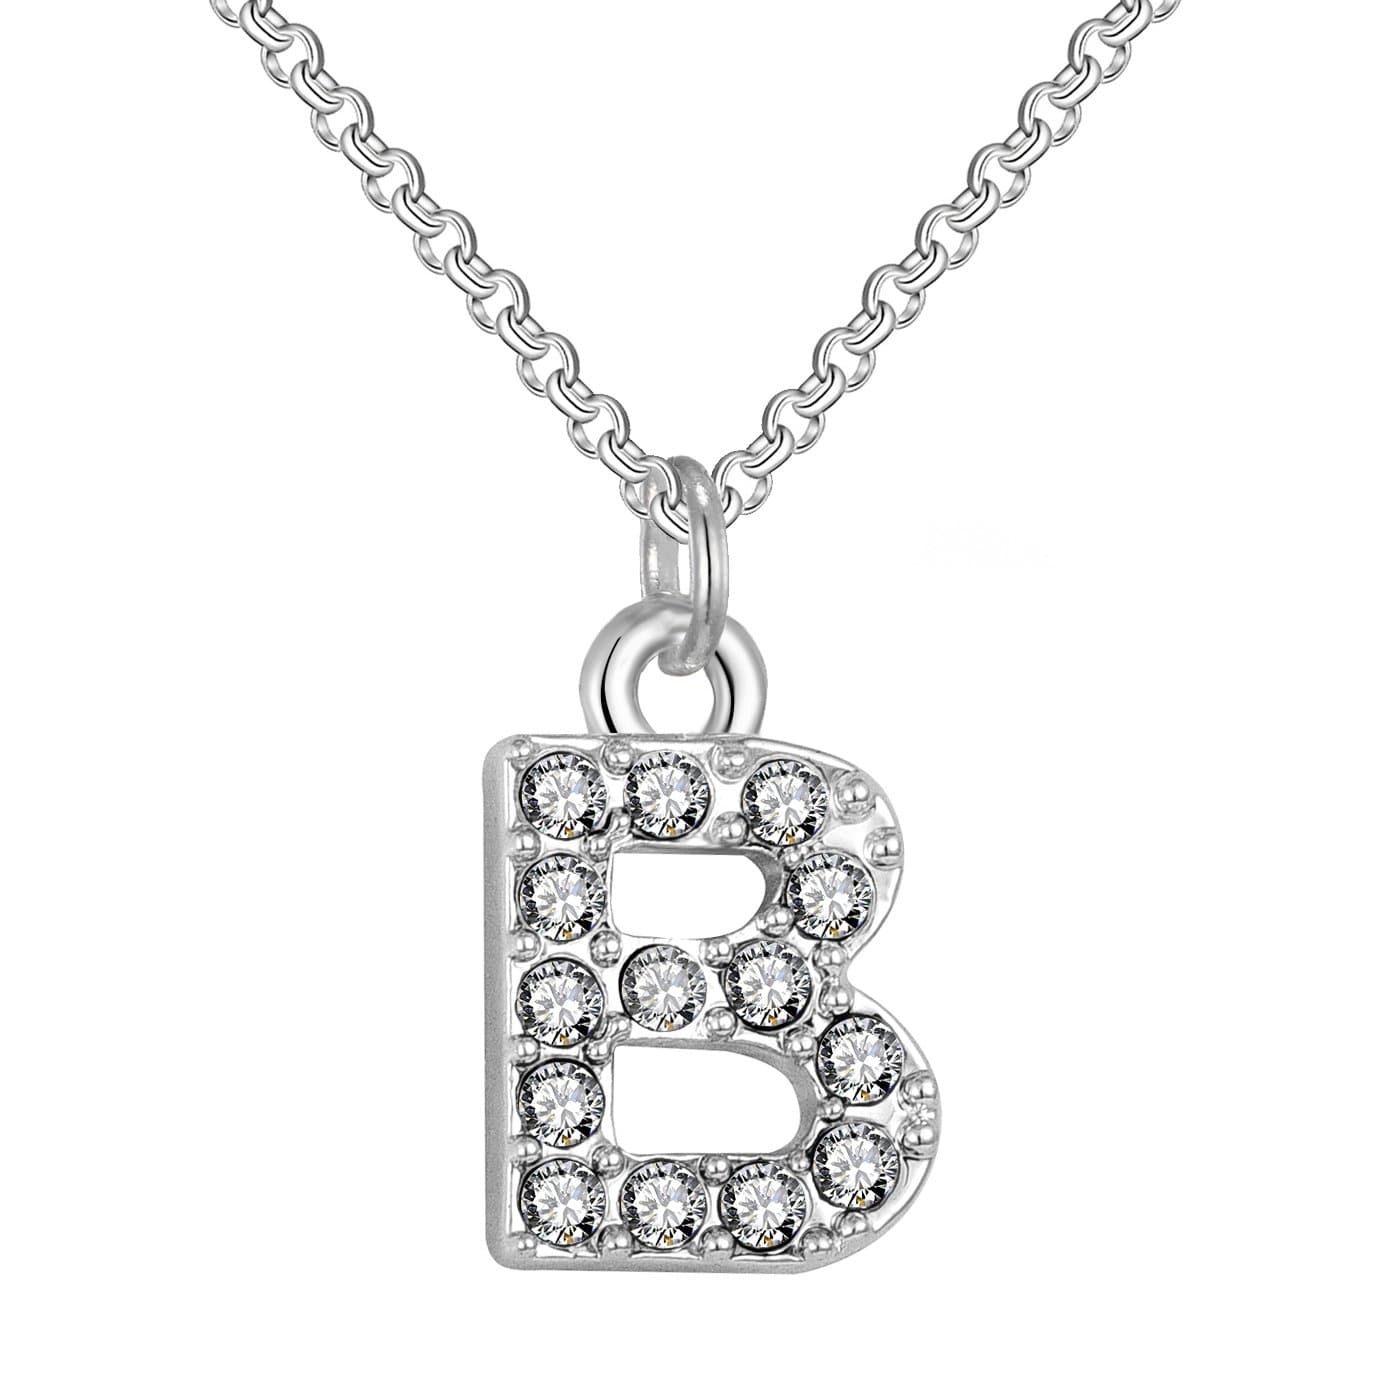 Pave Initial Necklace Letter B Created with Zircondia® Crystals by Philip Jones Jewellery